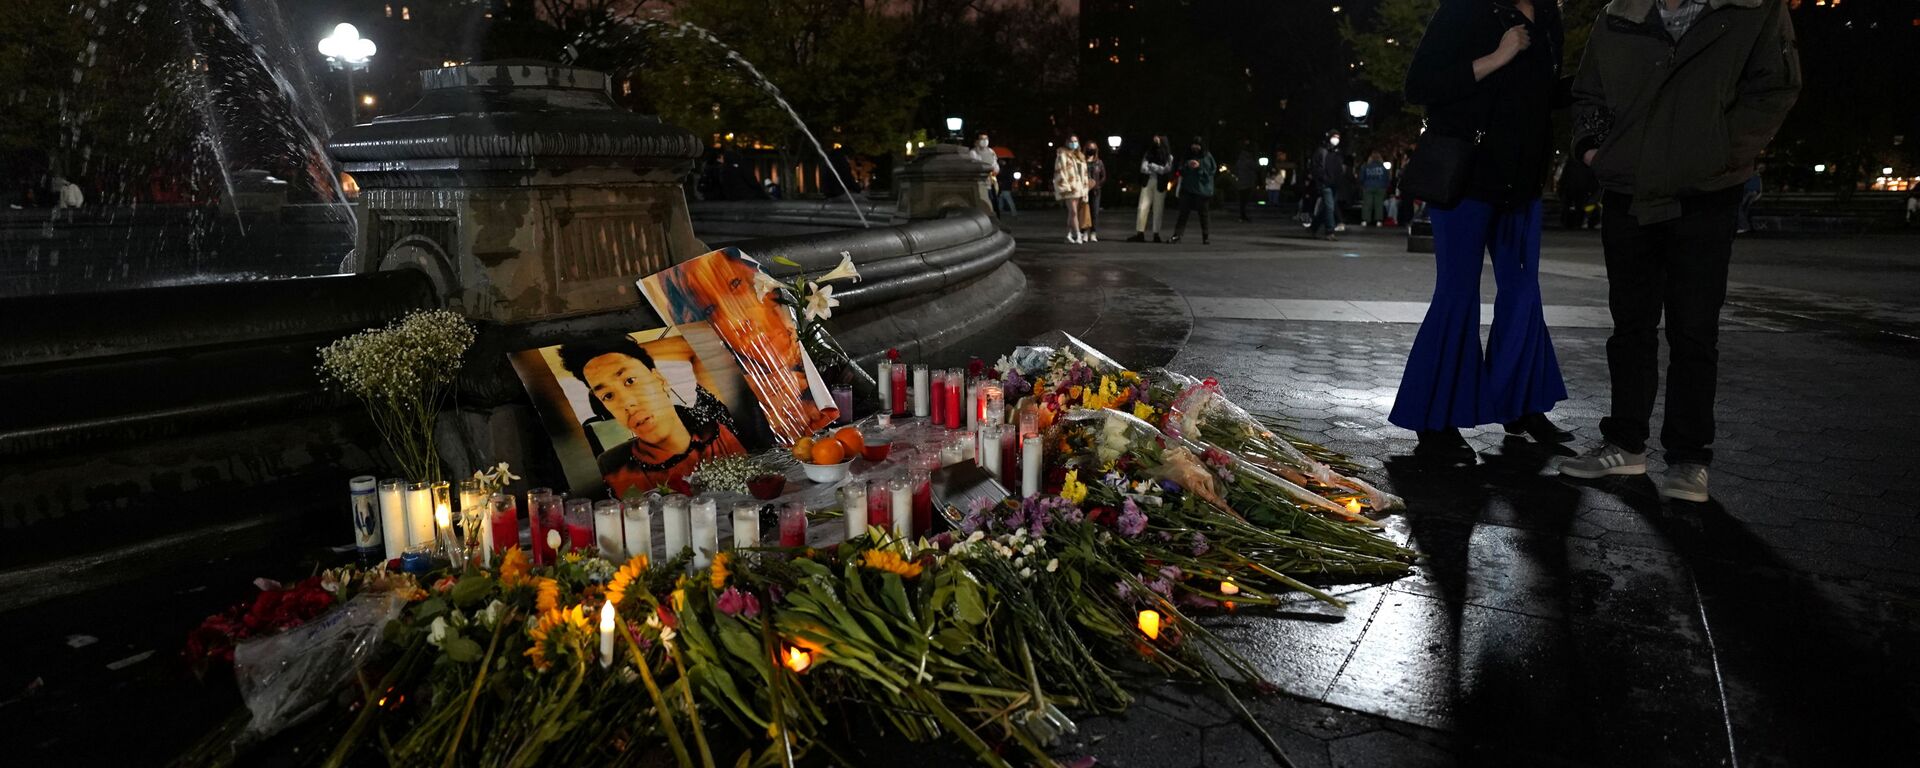 People look at a memorial in Washington Square Park for Daunte Wright and for Dominique Lucious in New York City, U.S., April 16, 2021. - Sputnik International, 1920, 30.11.2021